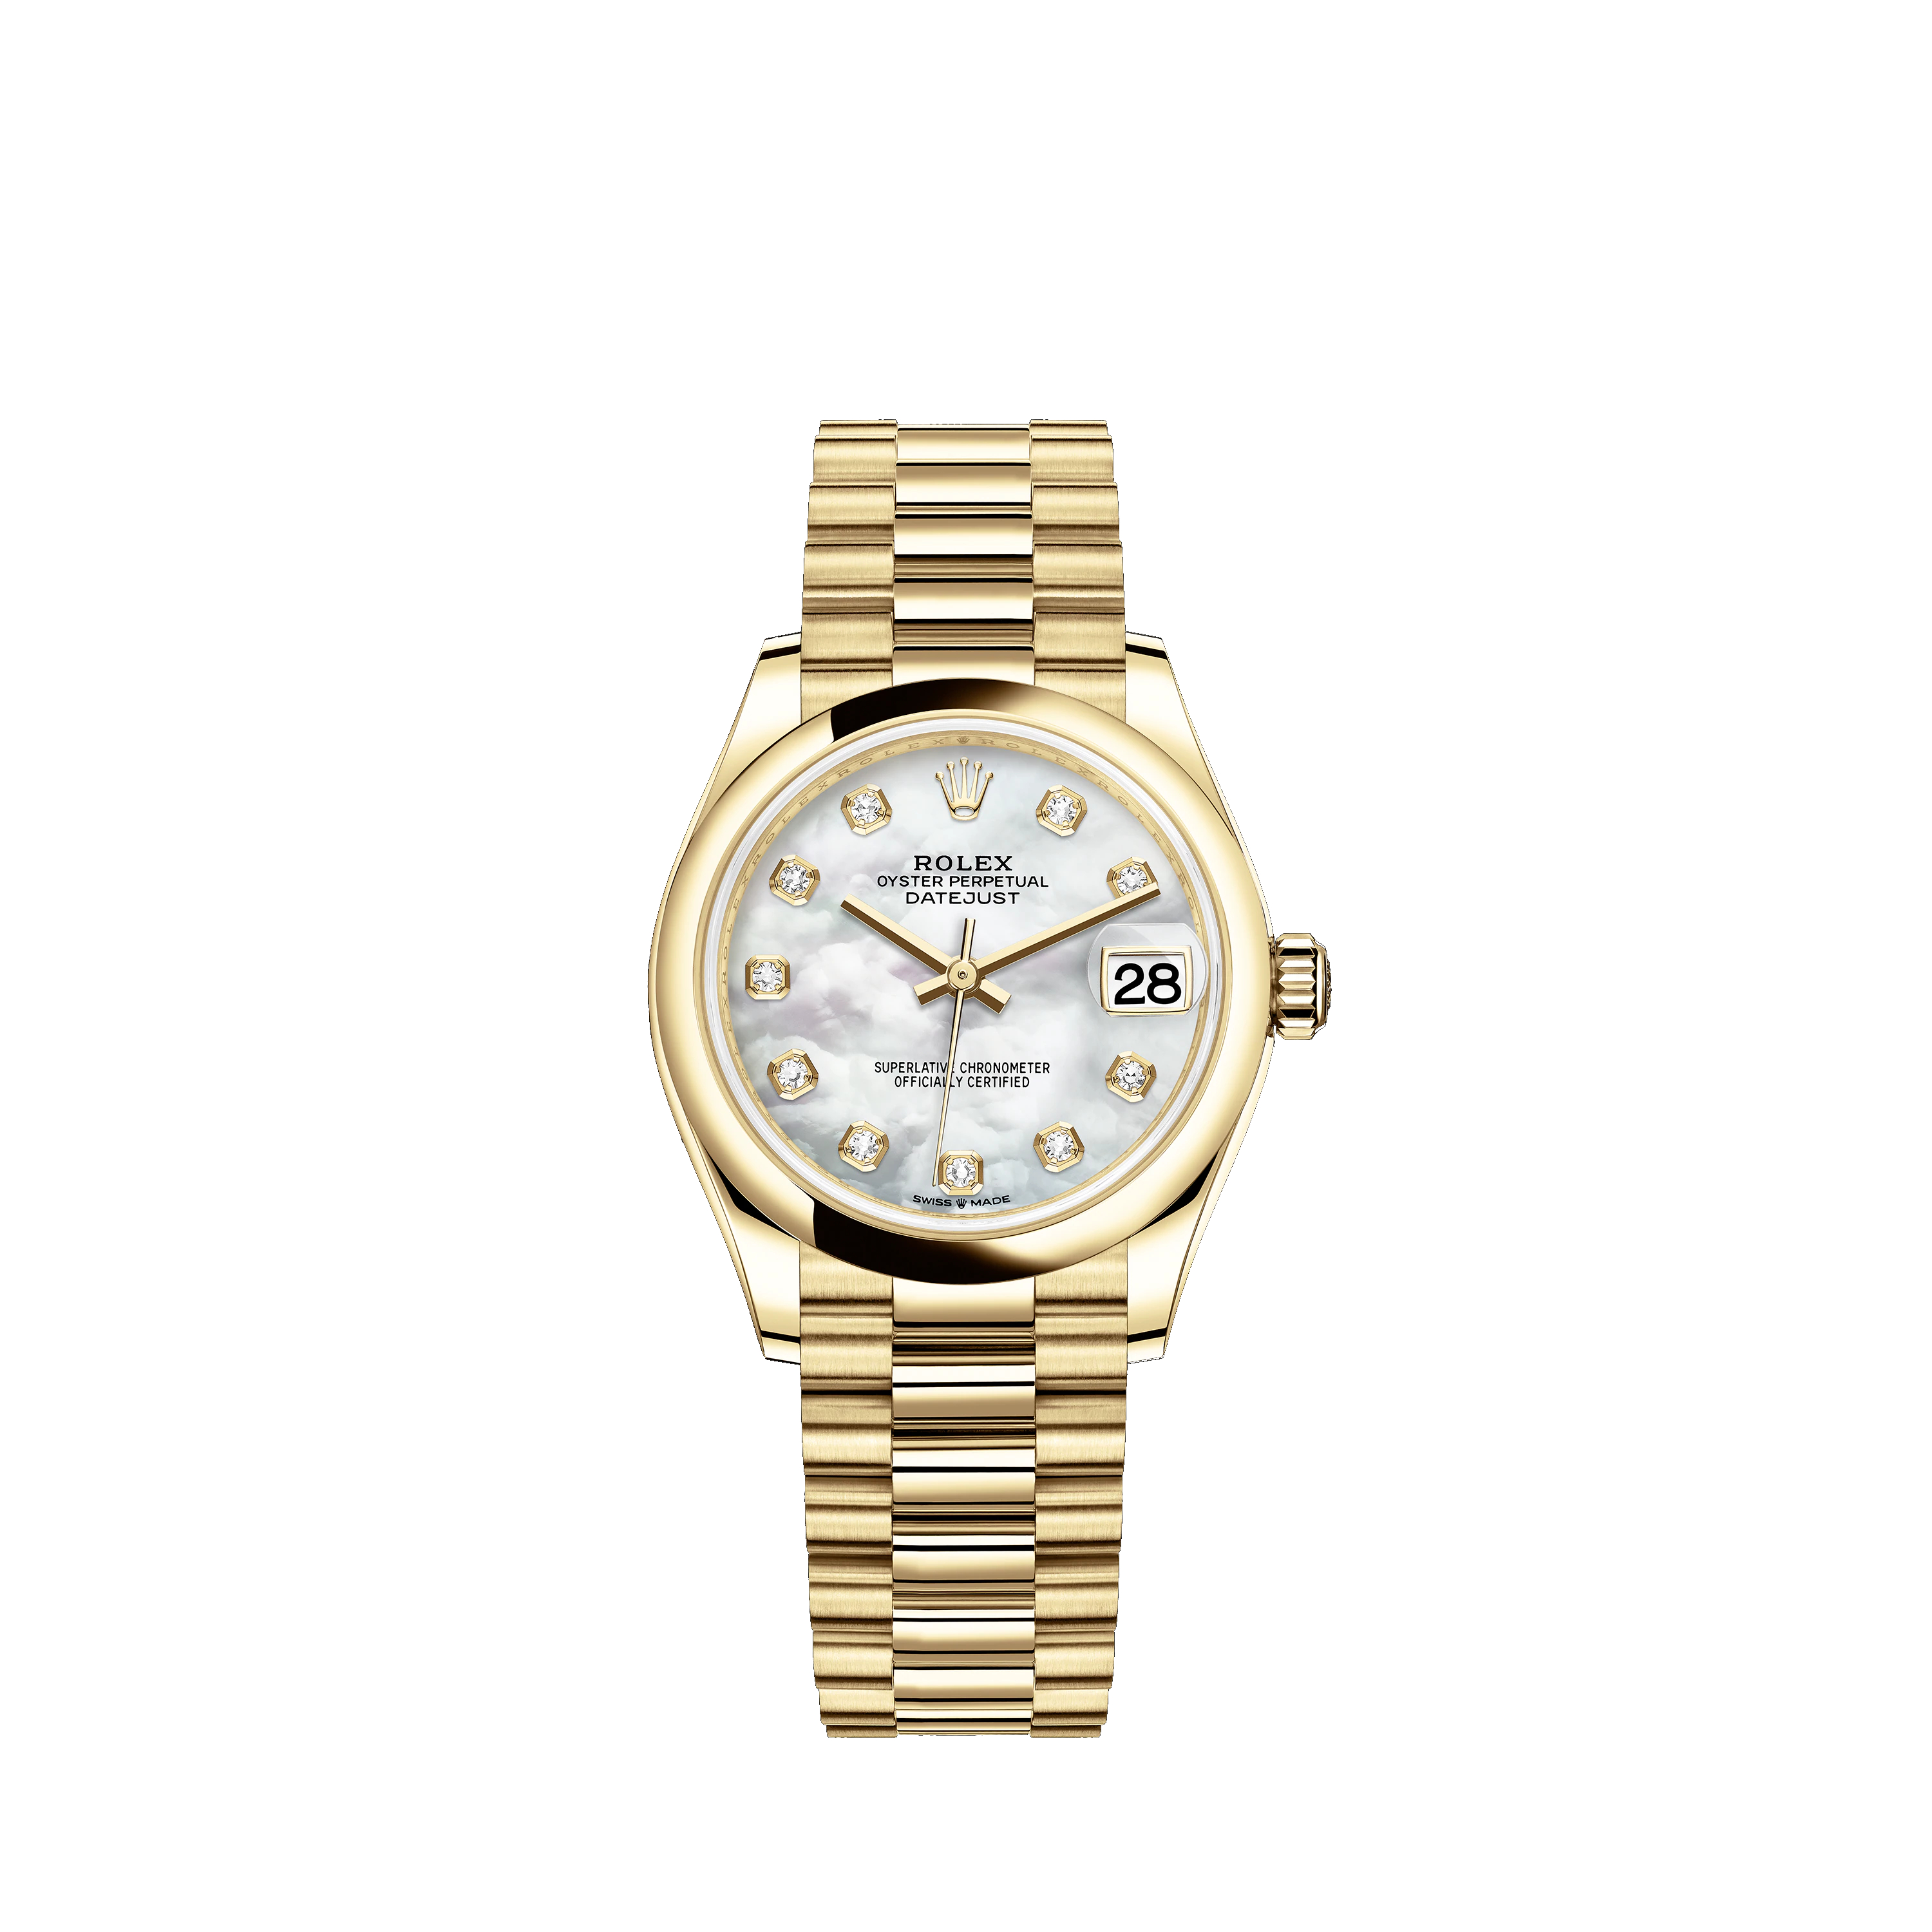 Datejust 31 278248 Gold Watch (White Mother-of-Pearl Set with Diamonds)